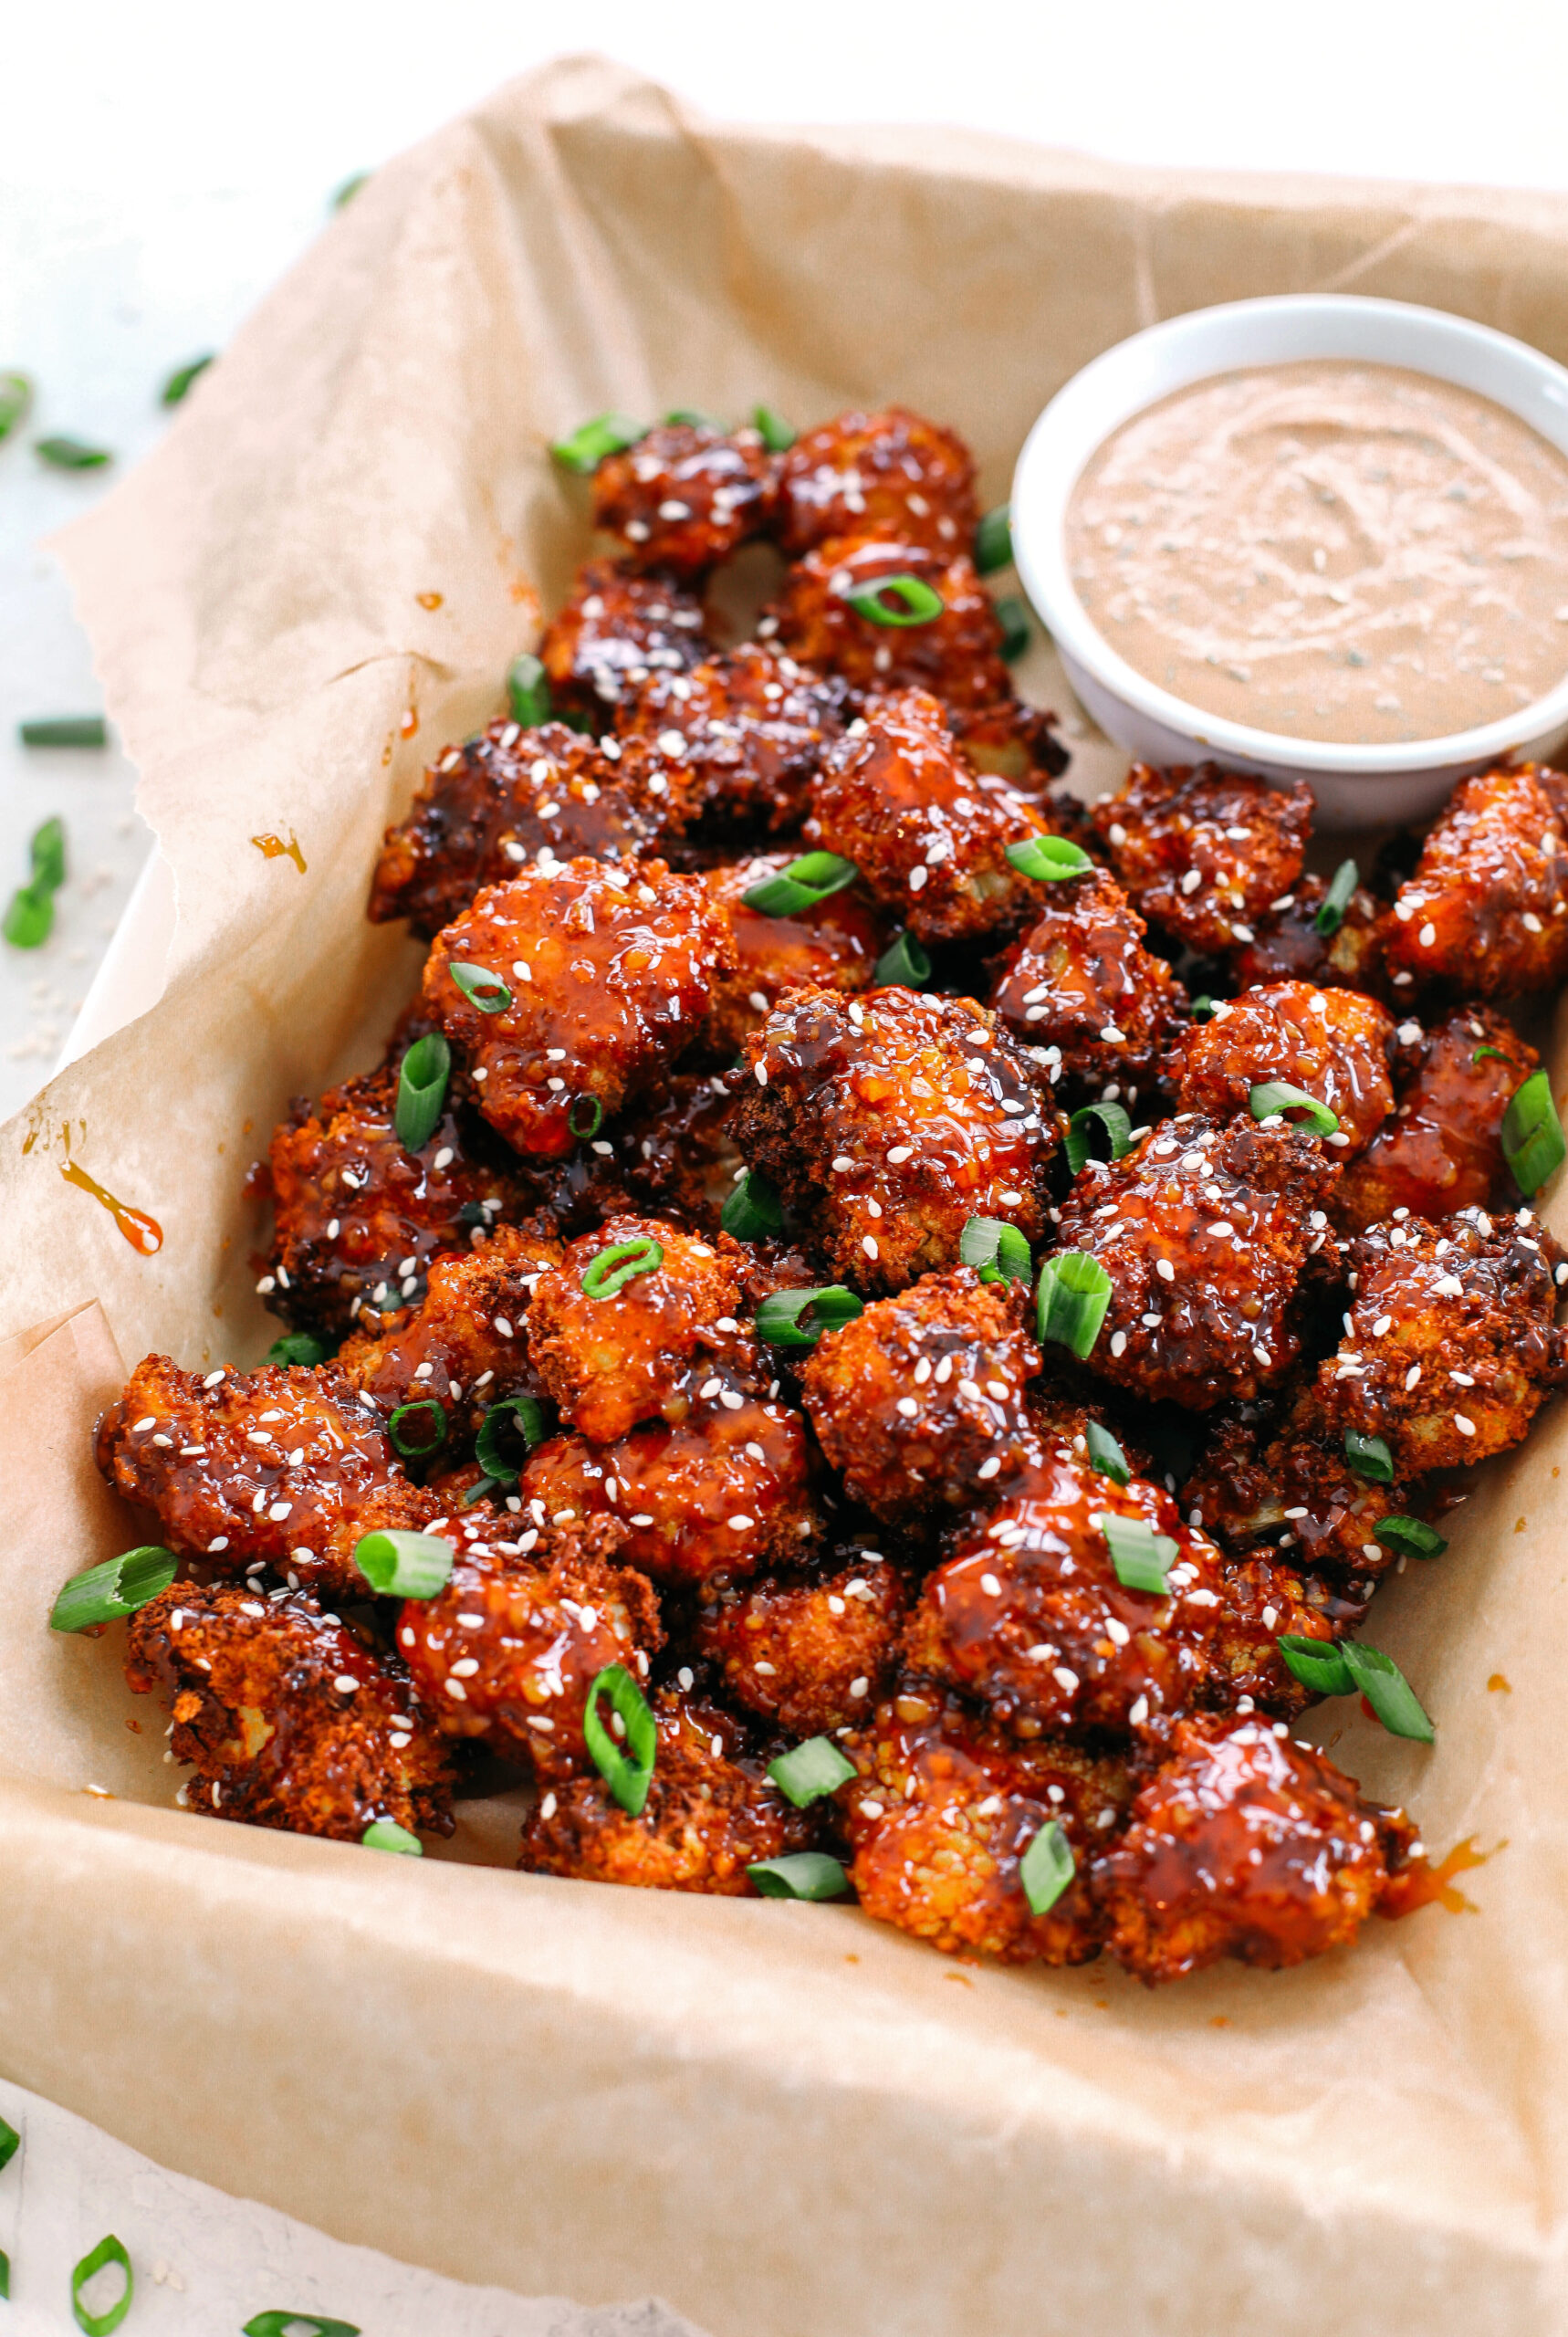 These Sticky Honey Garlic Cauliflower Wings are sweet, spicy and perfect for game day!  Easily made in the air fryer and served with the most delicious spicy ranch dipping sauce!